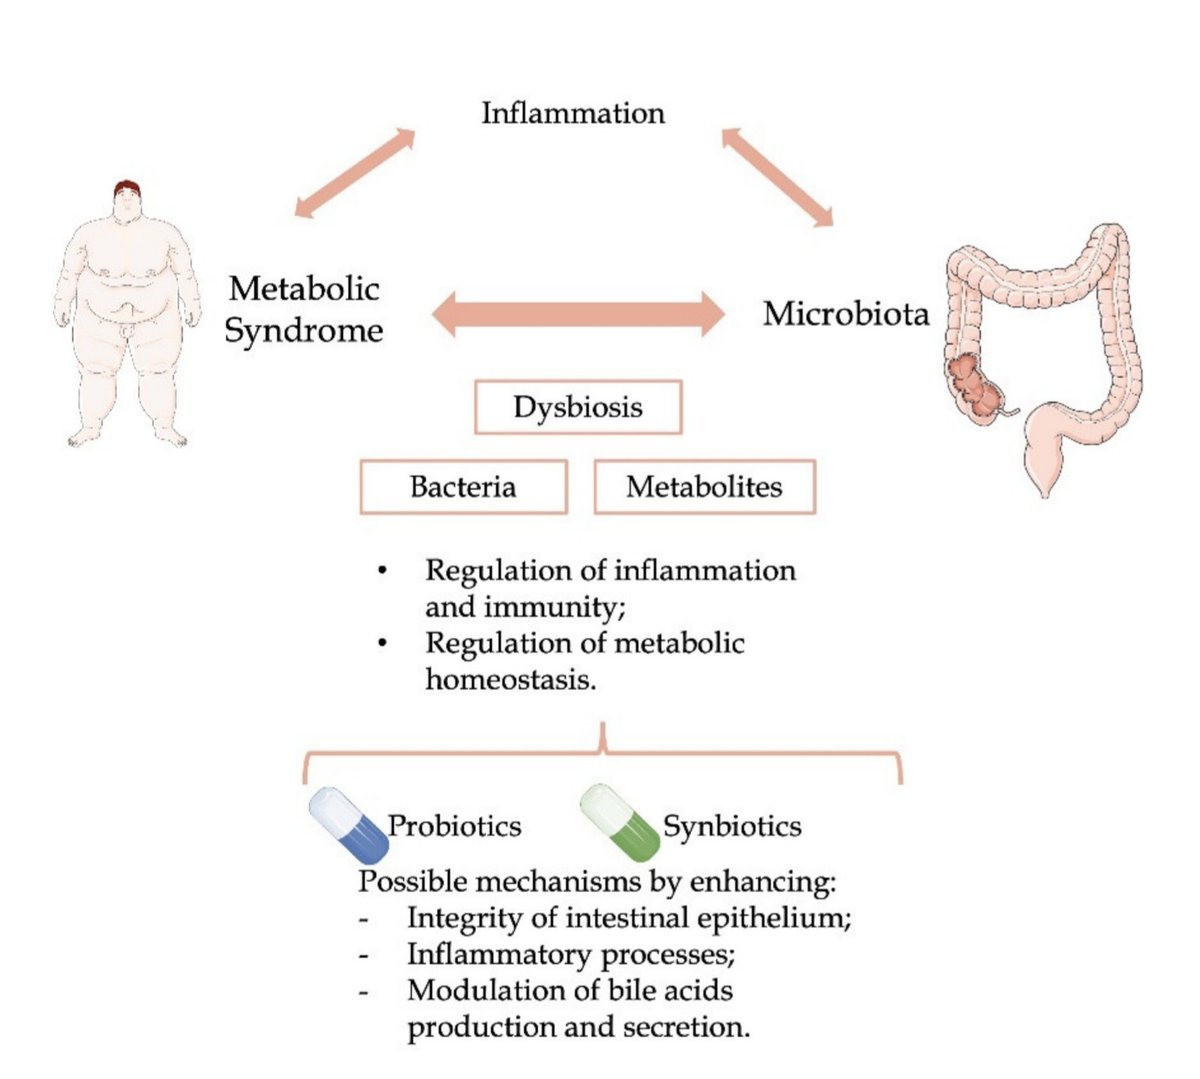 Microbiota (M) Modulation in Patients w/ Metabolic Syndrome (MS) ➡️Patients w/MS seem to have a different M composition compared to patients without MS. mdpi.com/2072-6643/14/2… @DHPSP @_INPST Mechanisms & modulation of the relationship between MS, human M & inflammation: